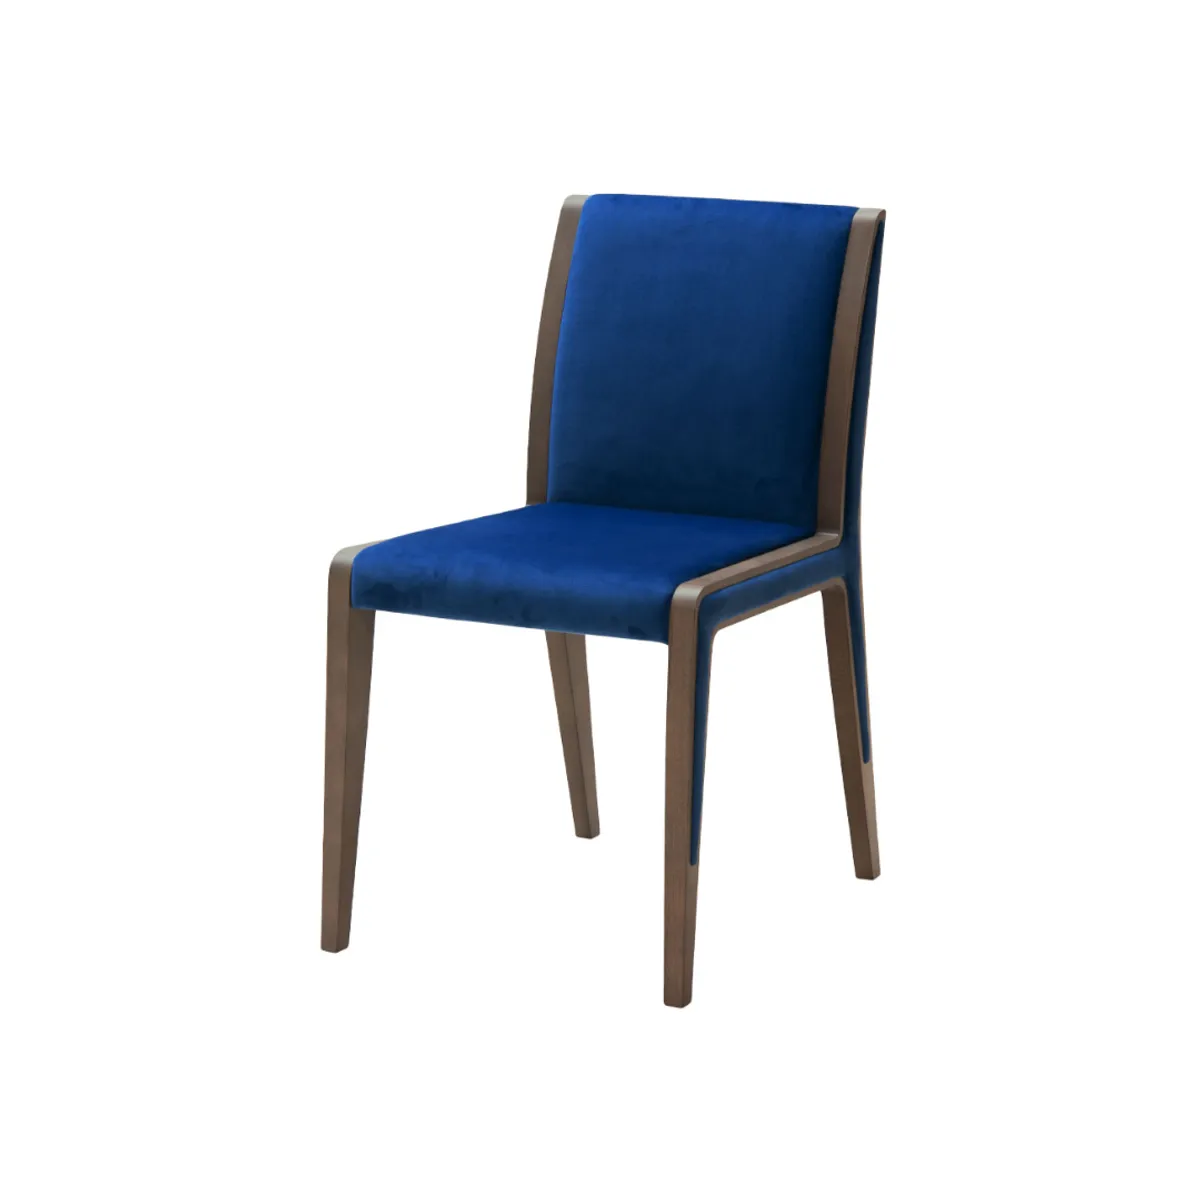 Canary side chair 4